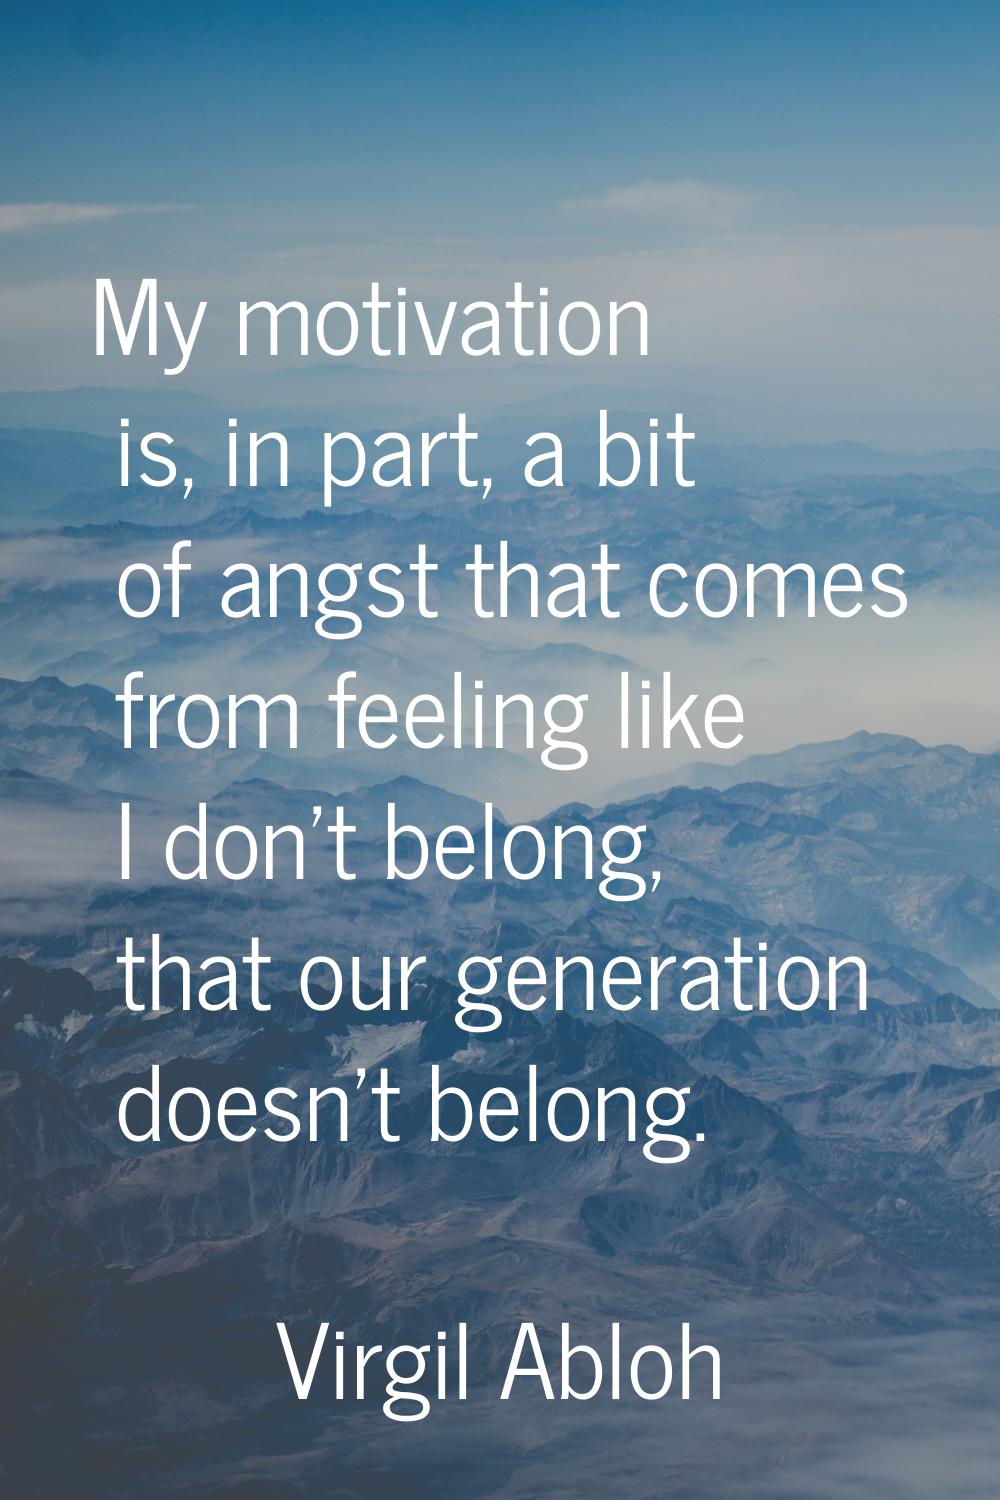 My motivation is, in part, a bit of angst that comes from feeling like I don't belong, that our gen